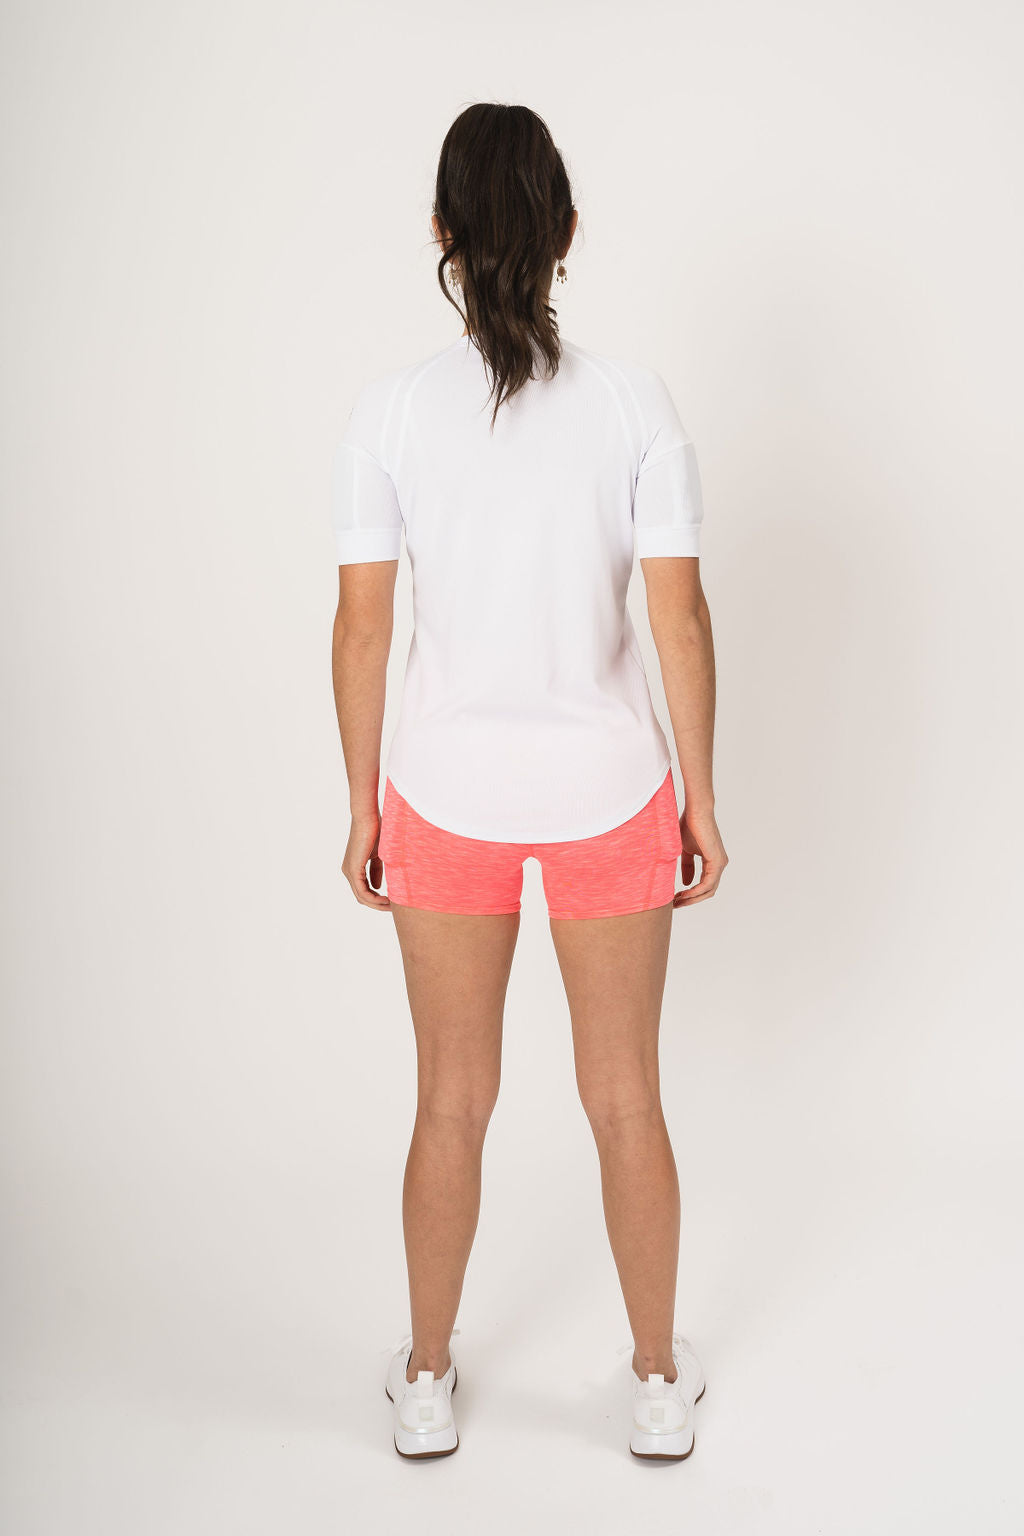 rear view showing woman wearing the weighted white short sleeve with weights on the biceps and the heather coral shorts with weights in the side weight pockets, found on the quads.